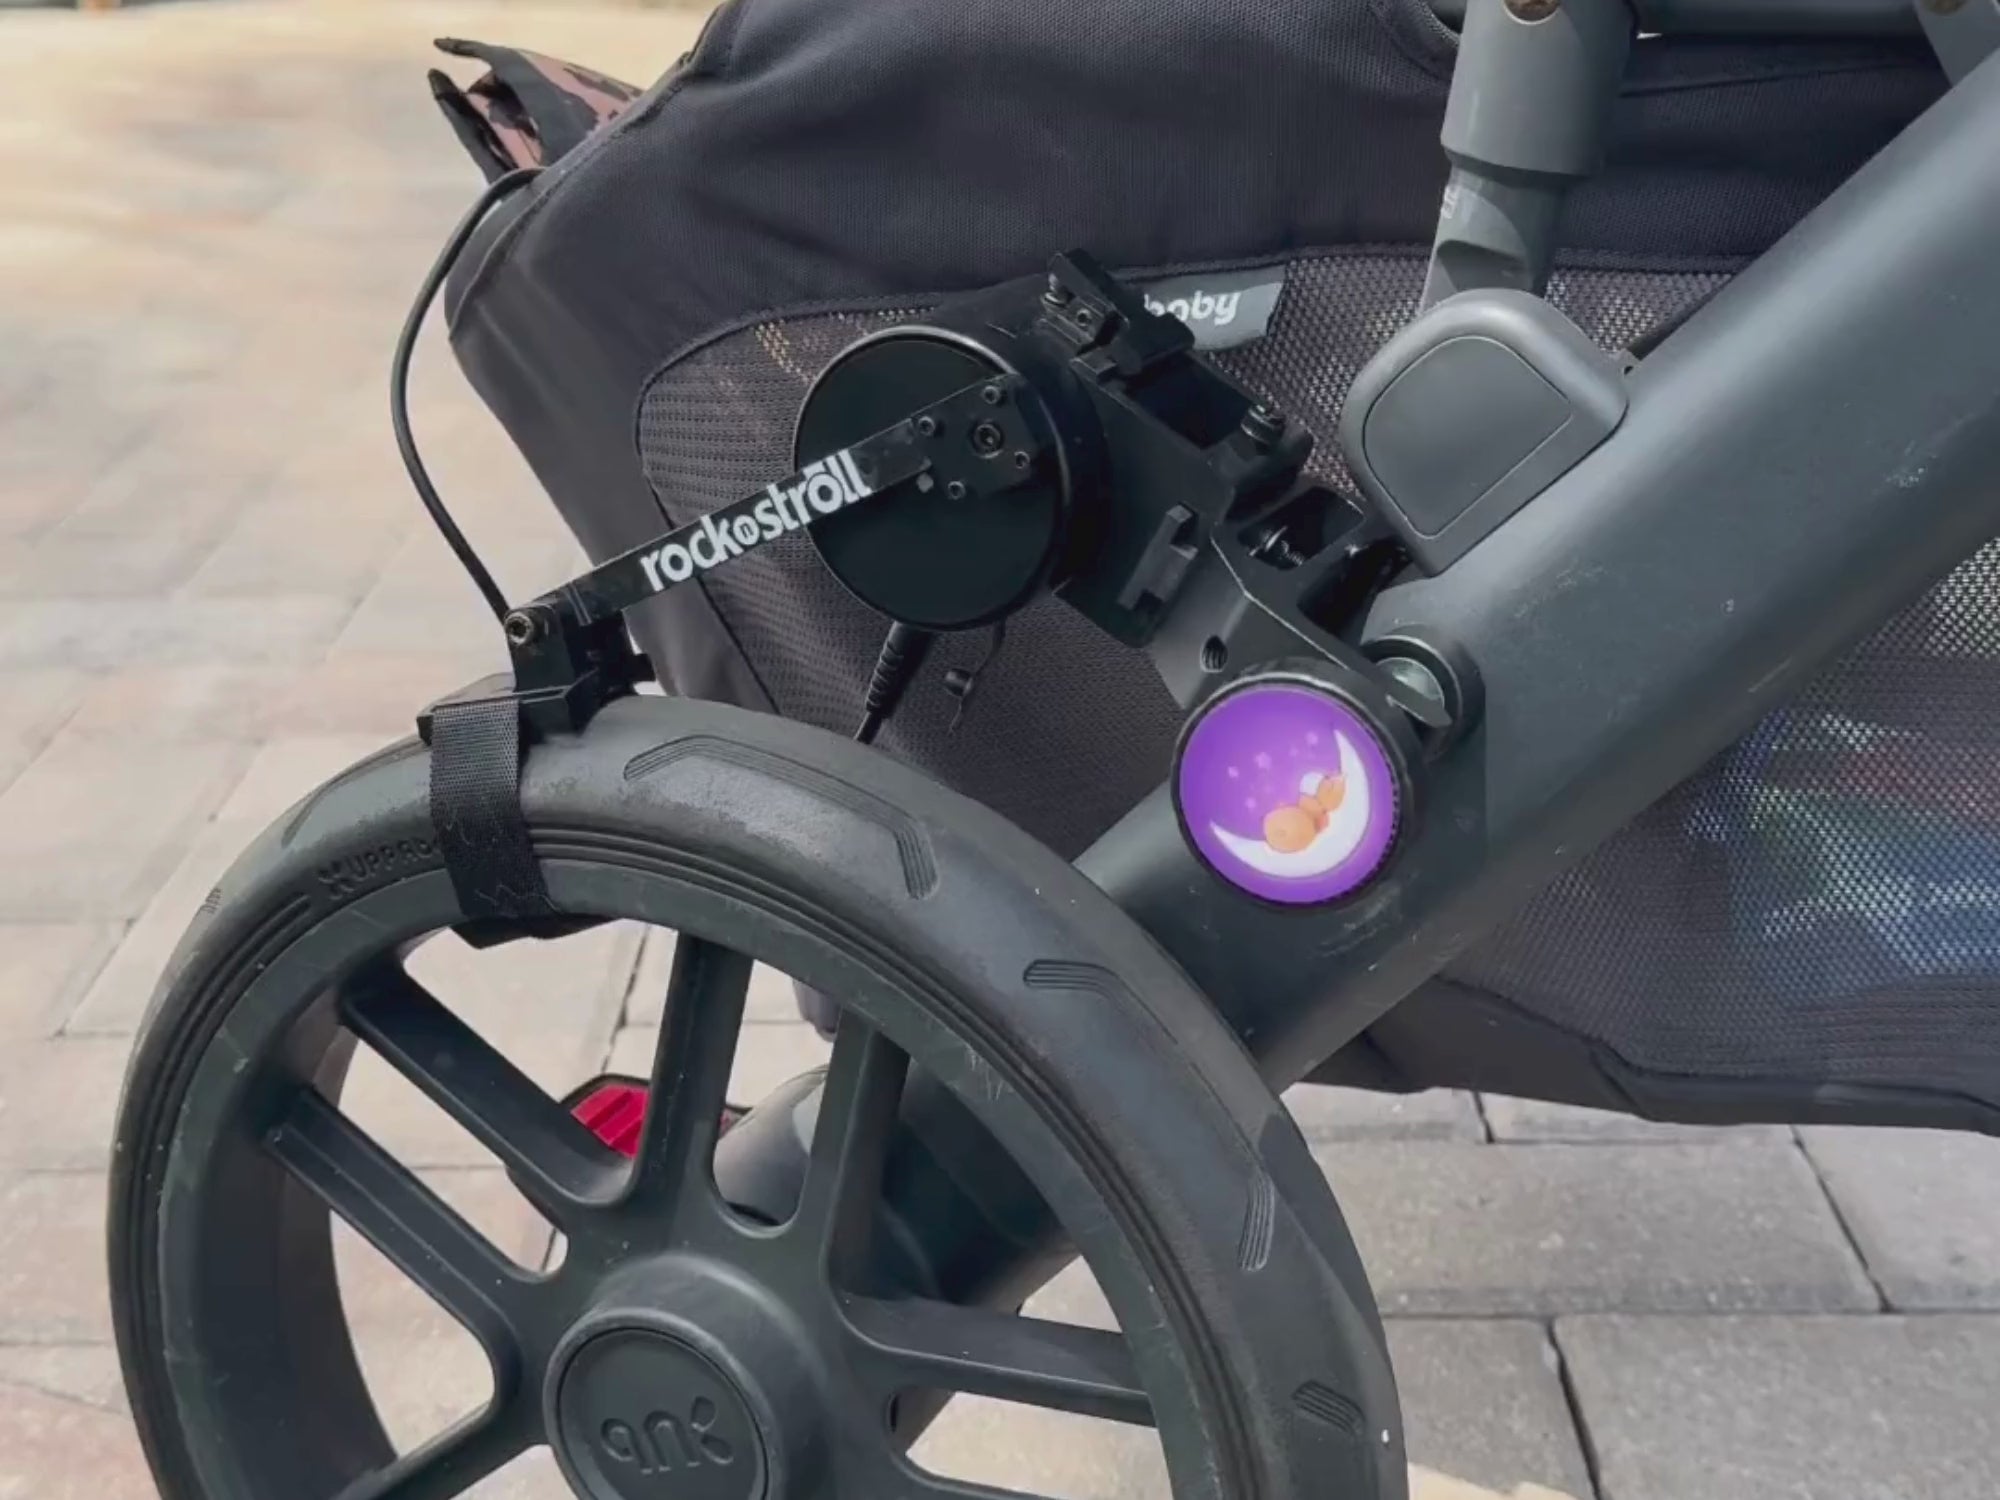 video of parent using rocknstroll stroller accessory